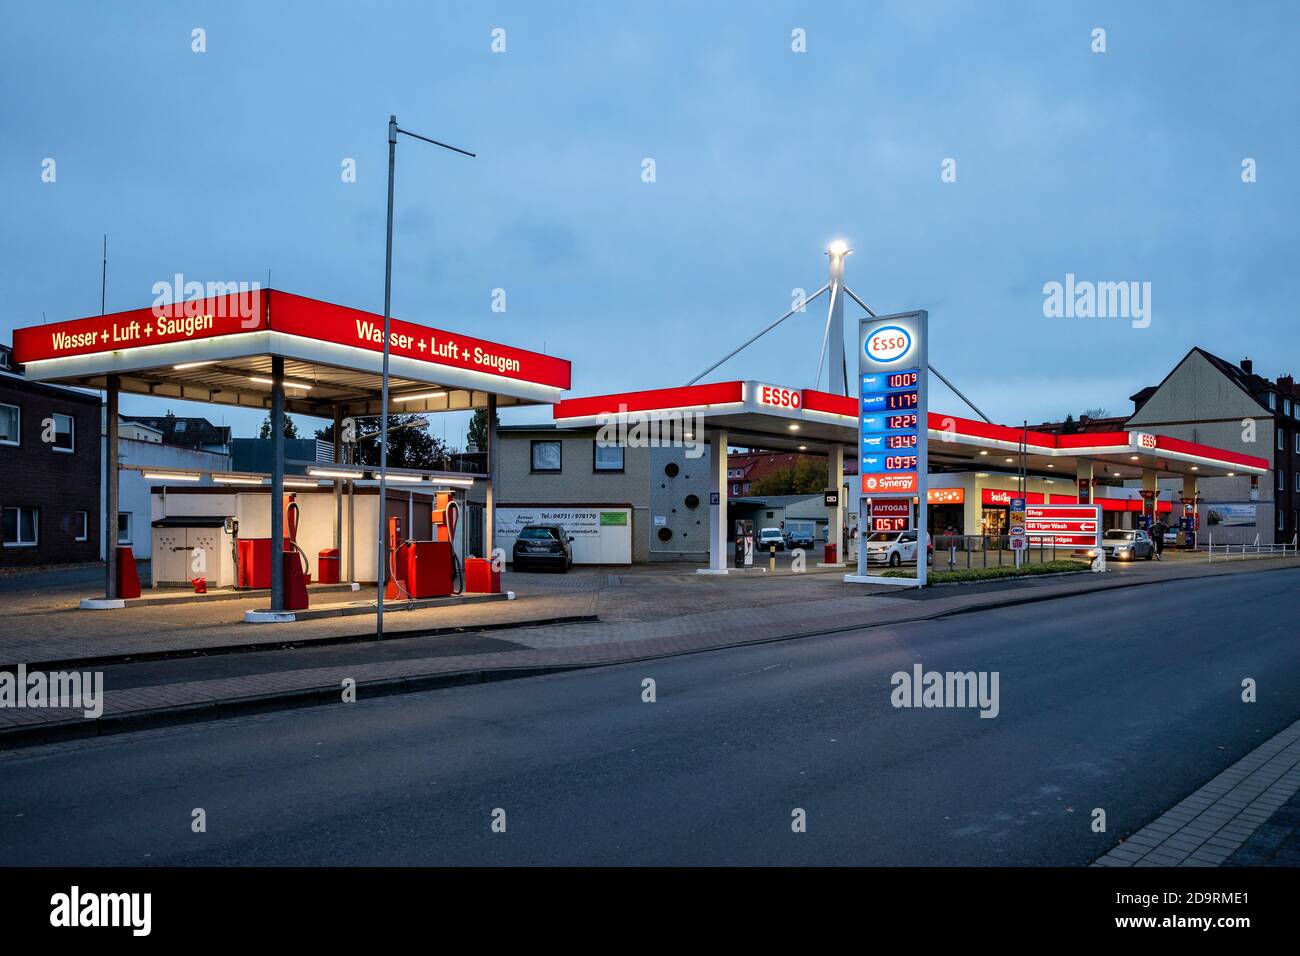 Esso gas station in Cuxhaven, Germany. Esso is ExxonMobil’s primary gasoline brand worldwide. Stock Photo